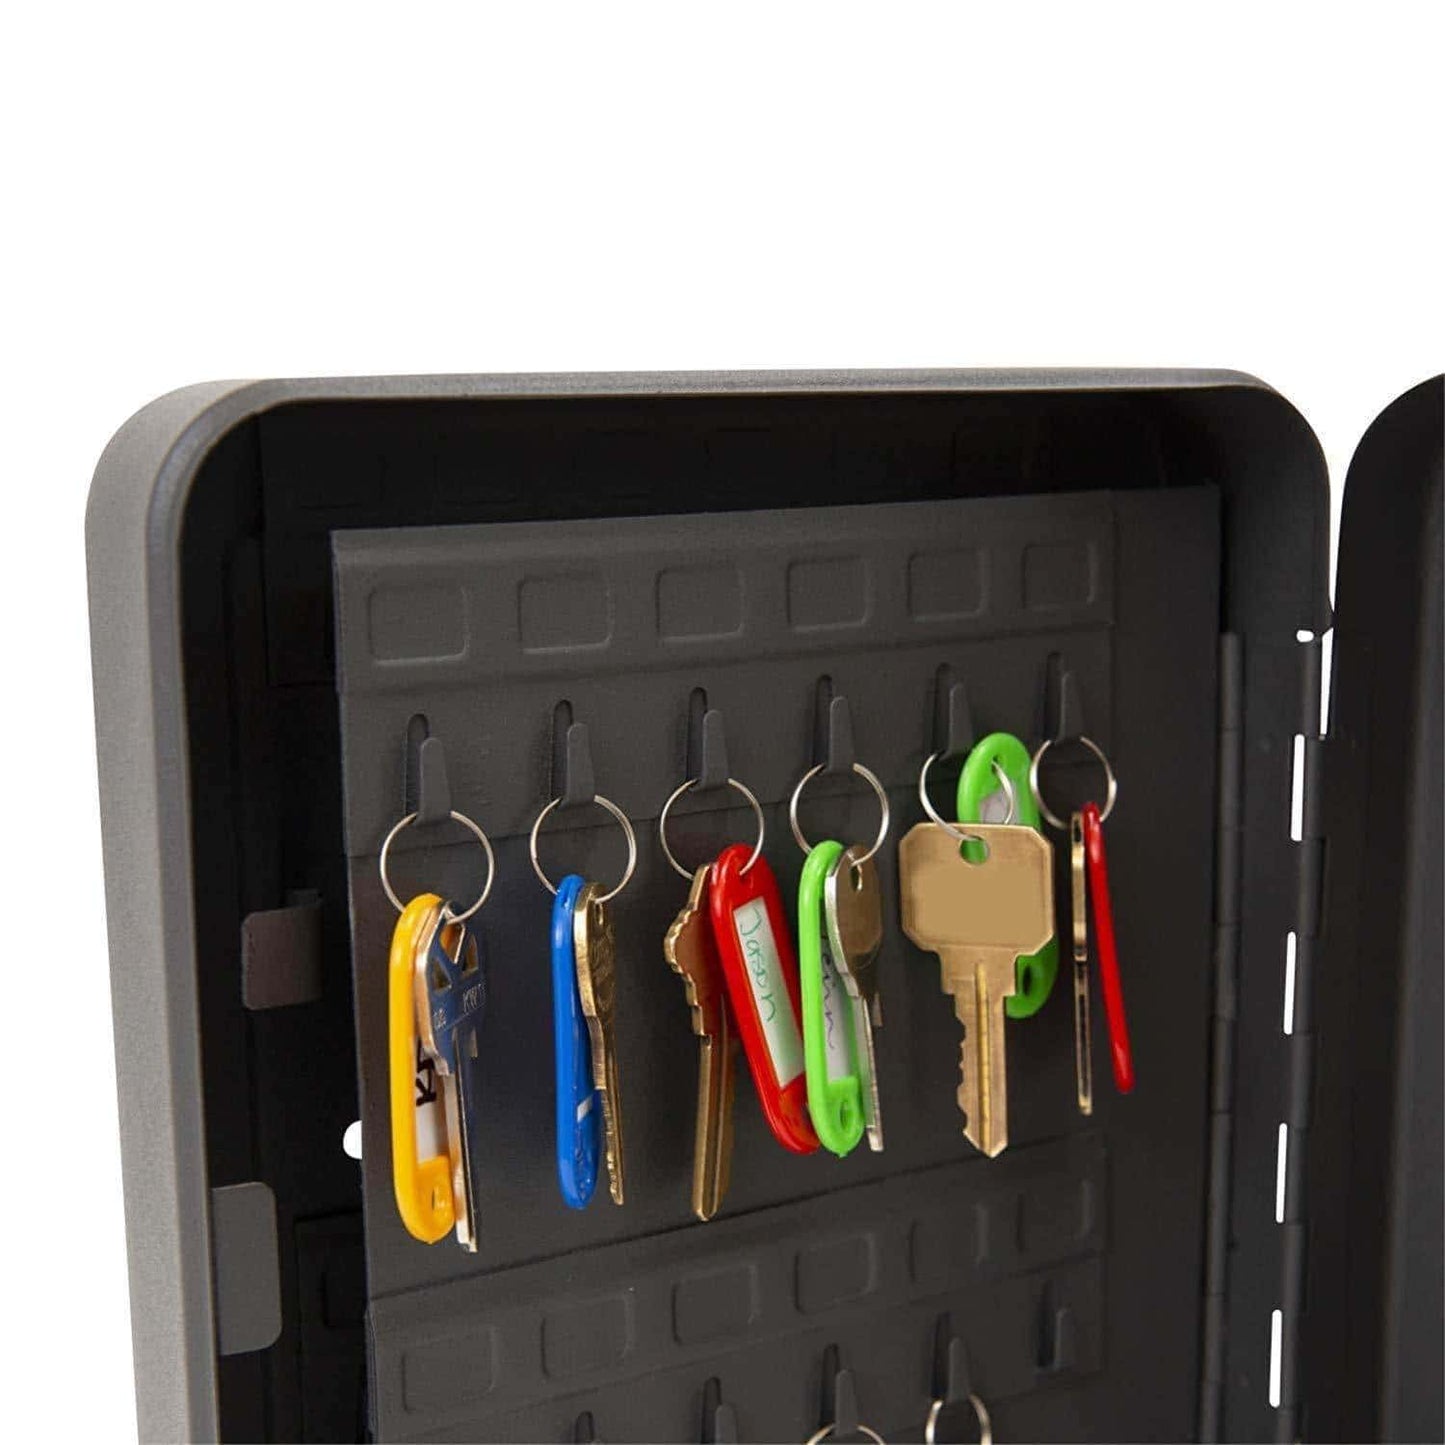 Results houseables key lock box lockbox cabinet wall mount safe 7 9 w x 9 9 l 48 tags black metal combination code locker storage organizer outdoor keybox closet for realtor real estate office